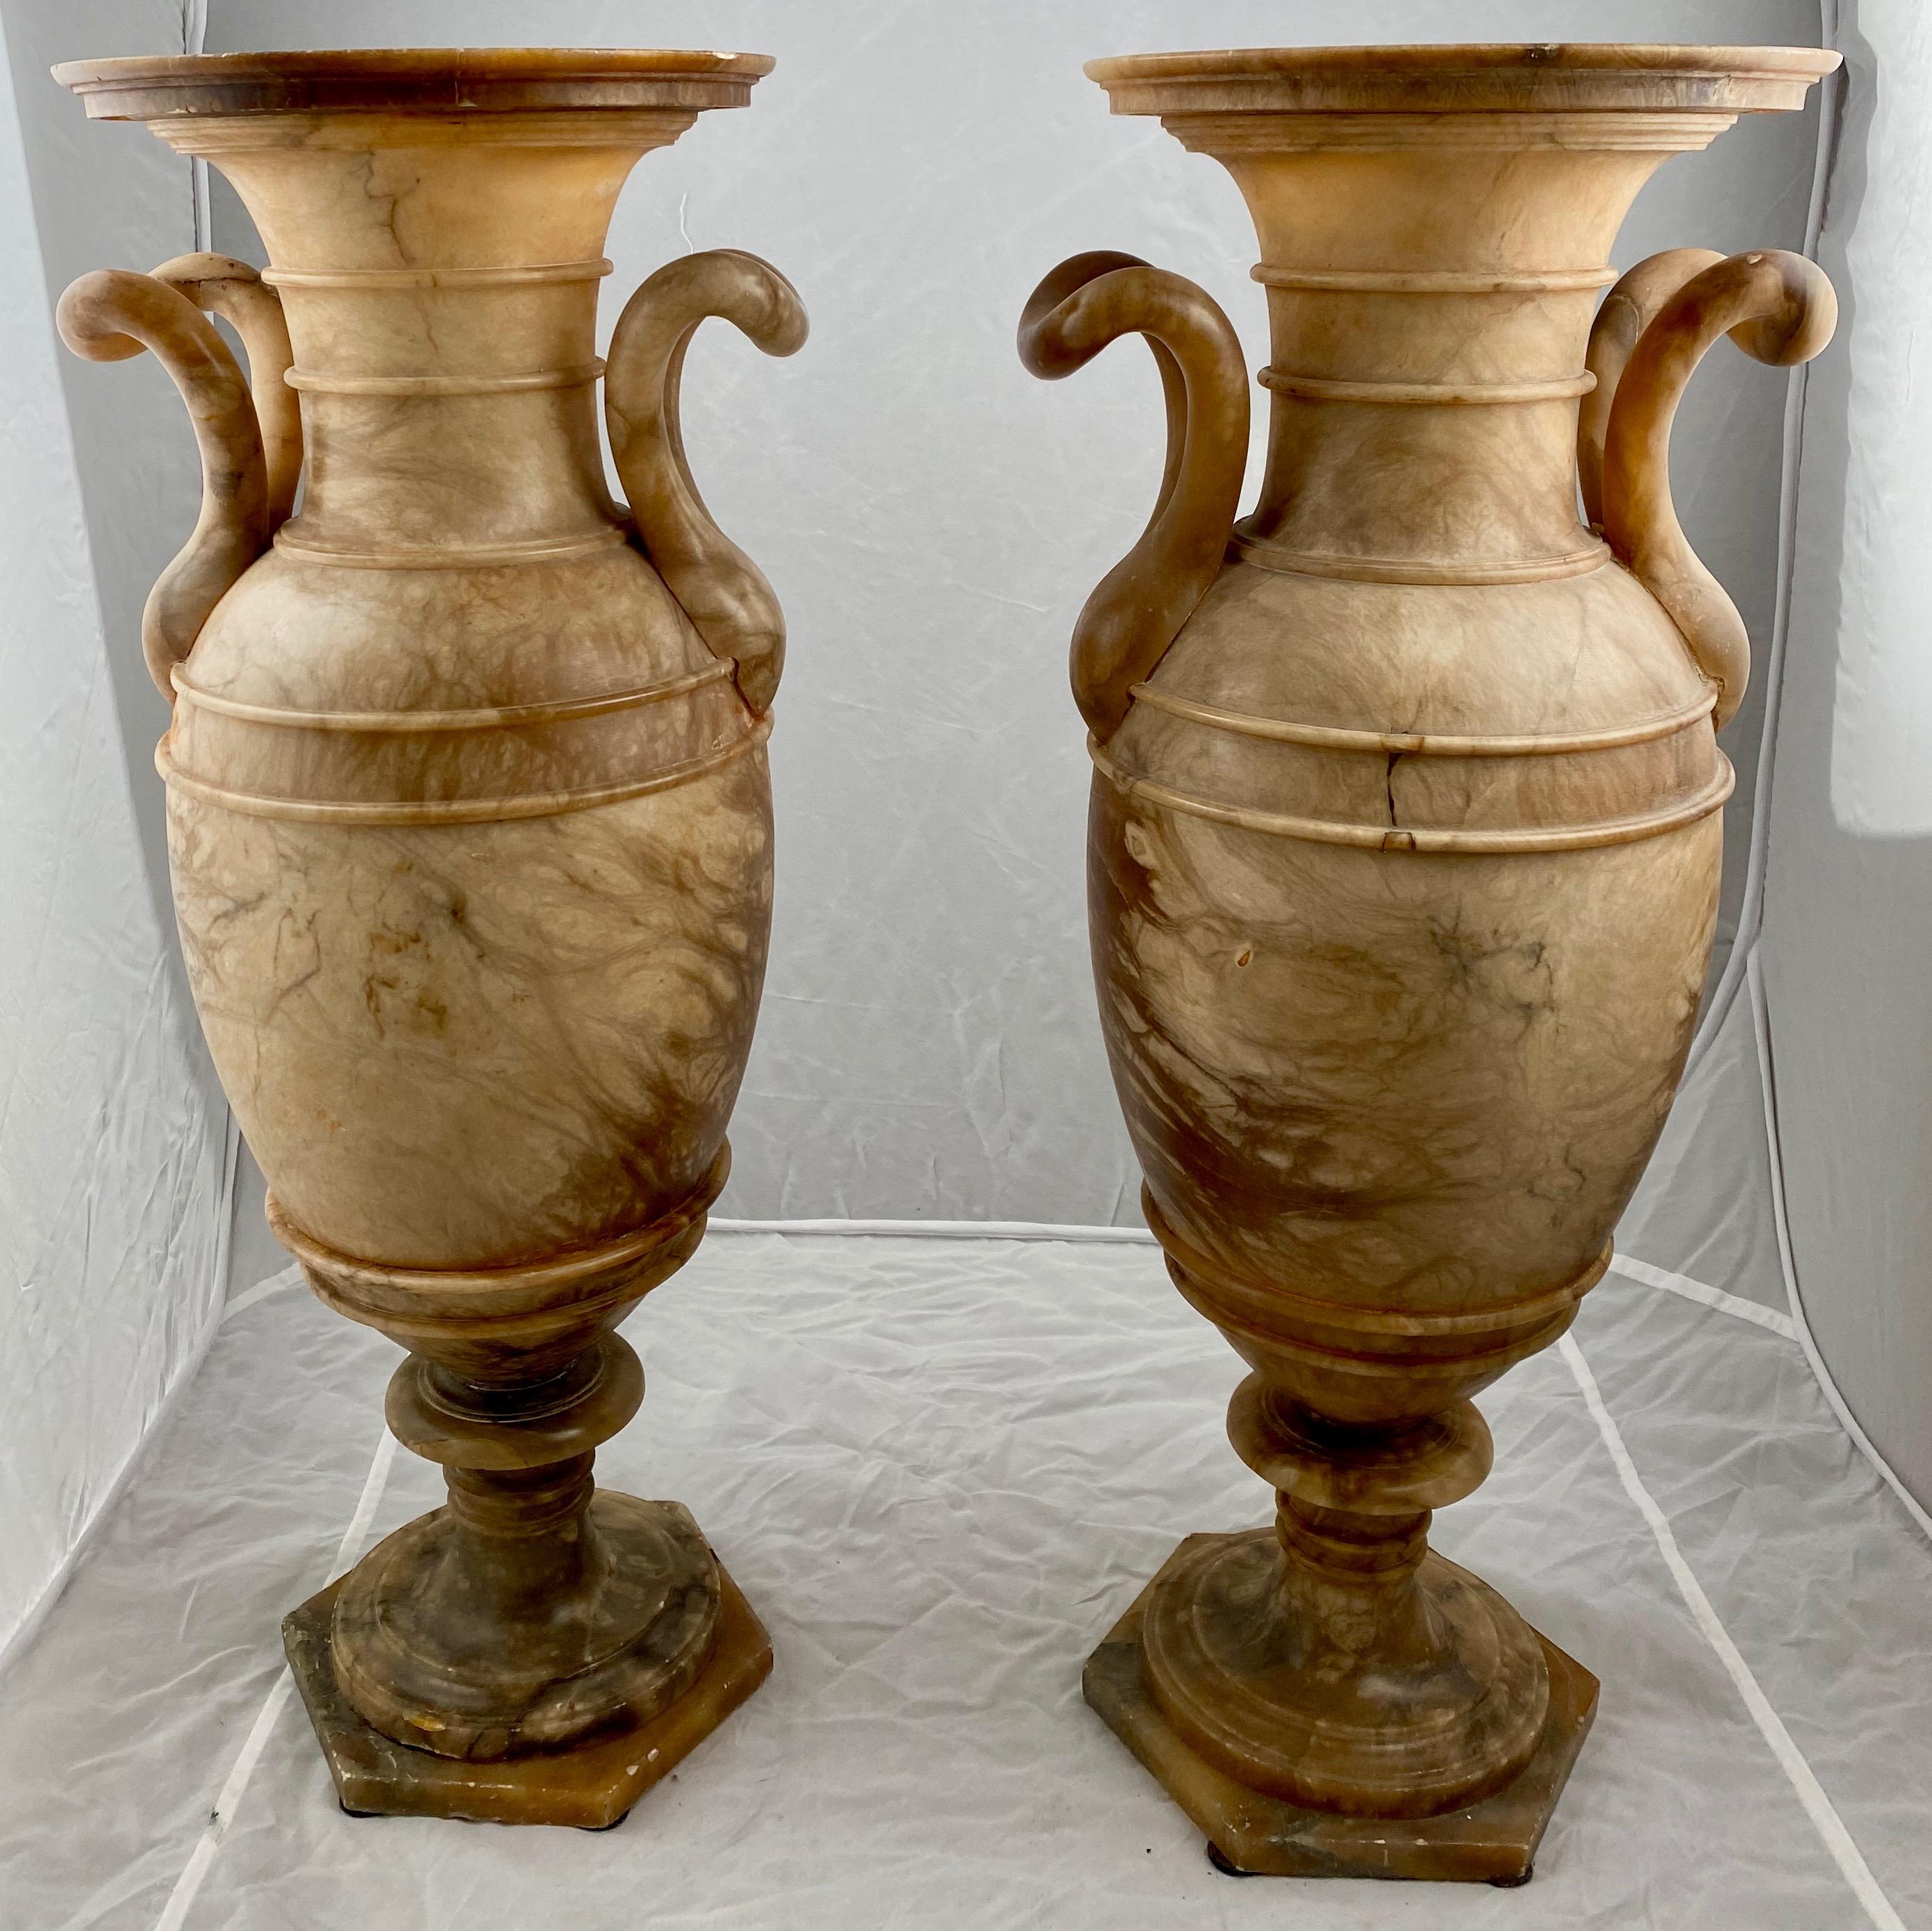 A pair of vases made by alabaster, early 19th century Italian.

Great warm color. Small restoration to one base.